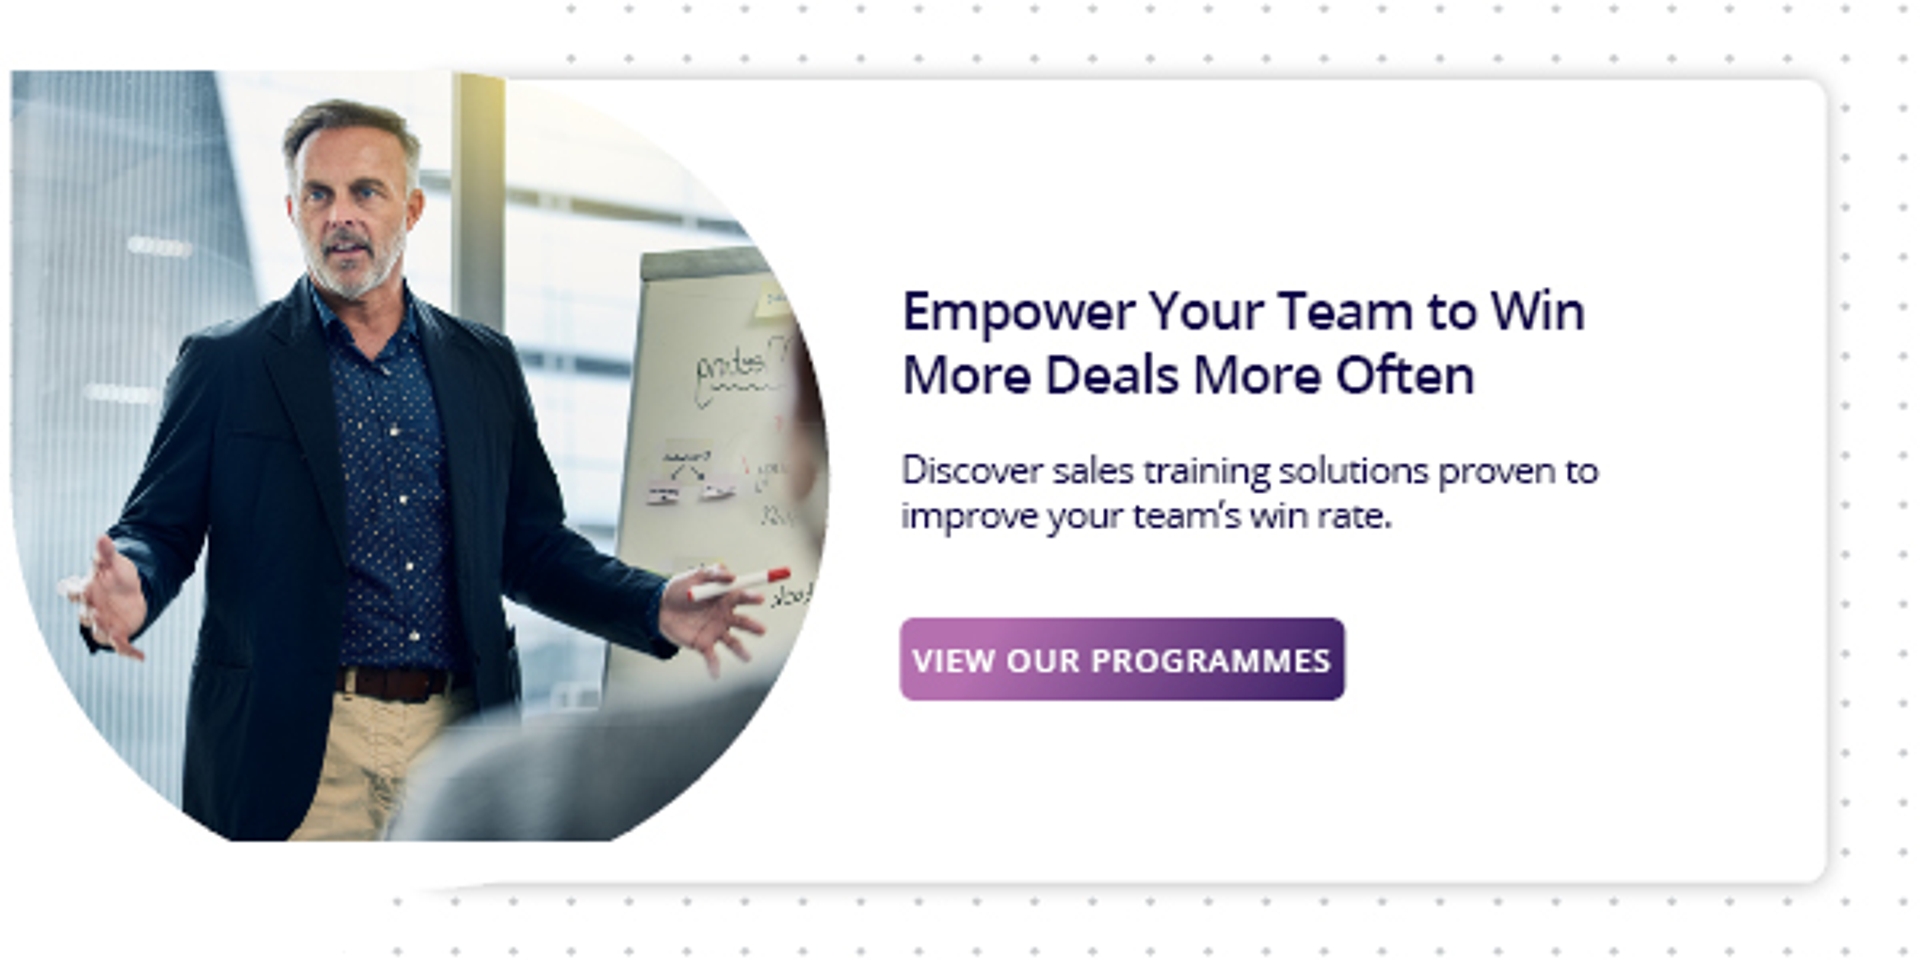 View sales training programmes to win more business